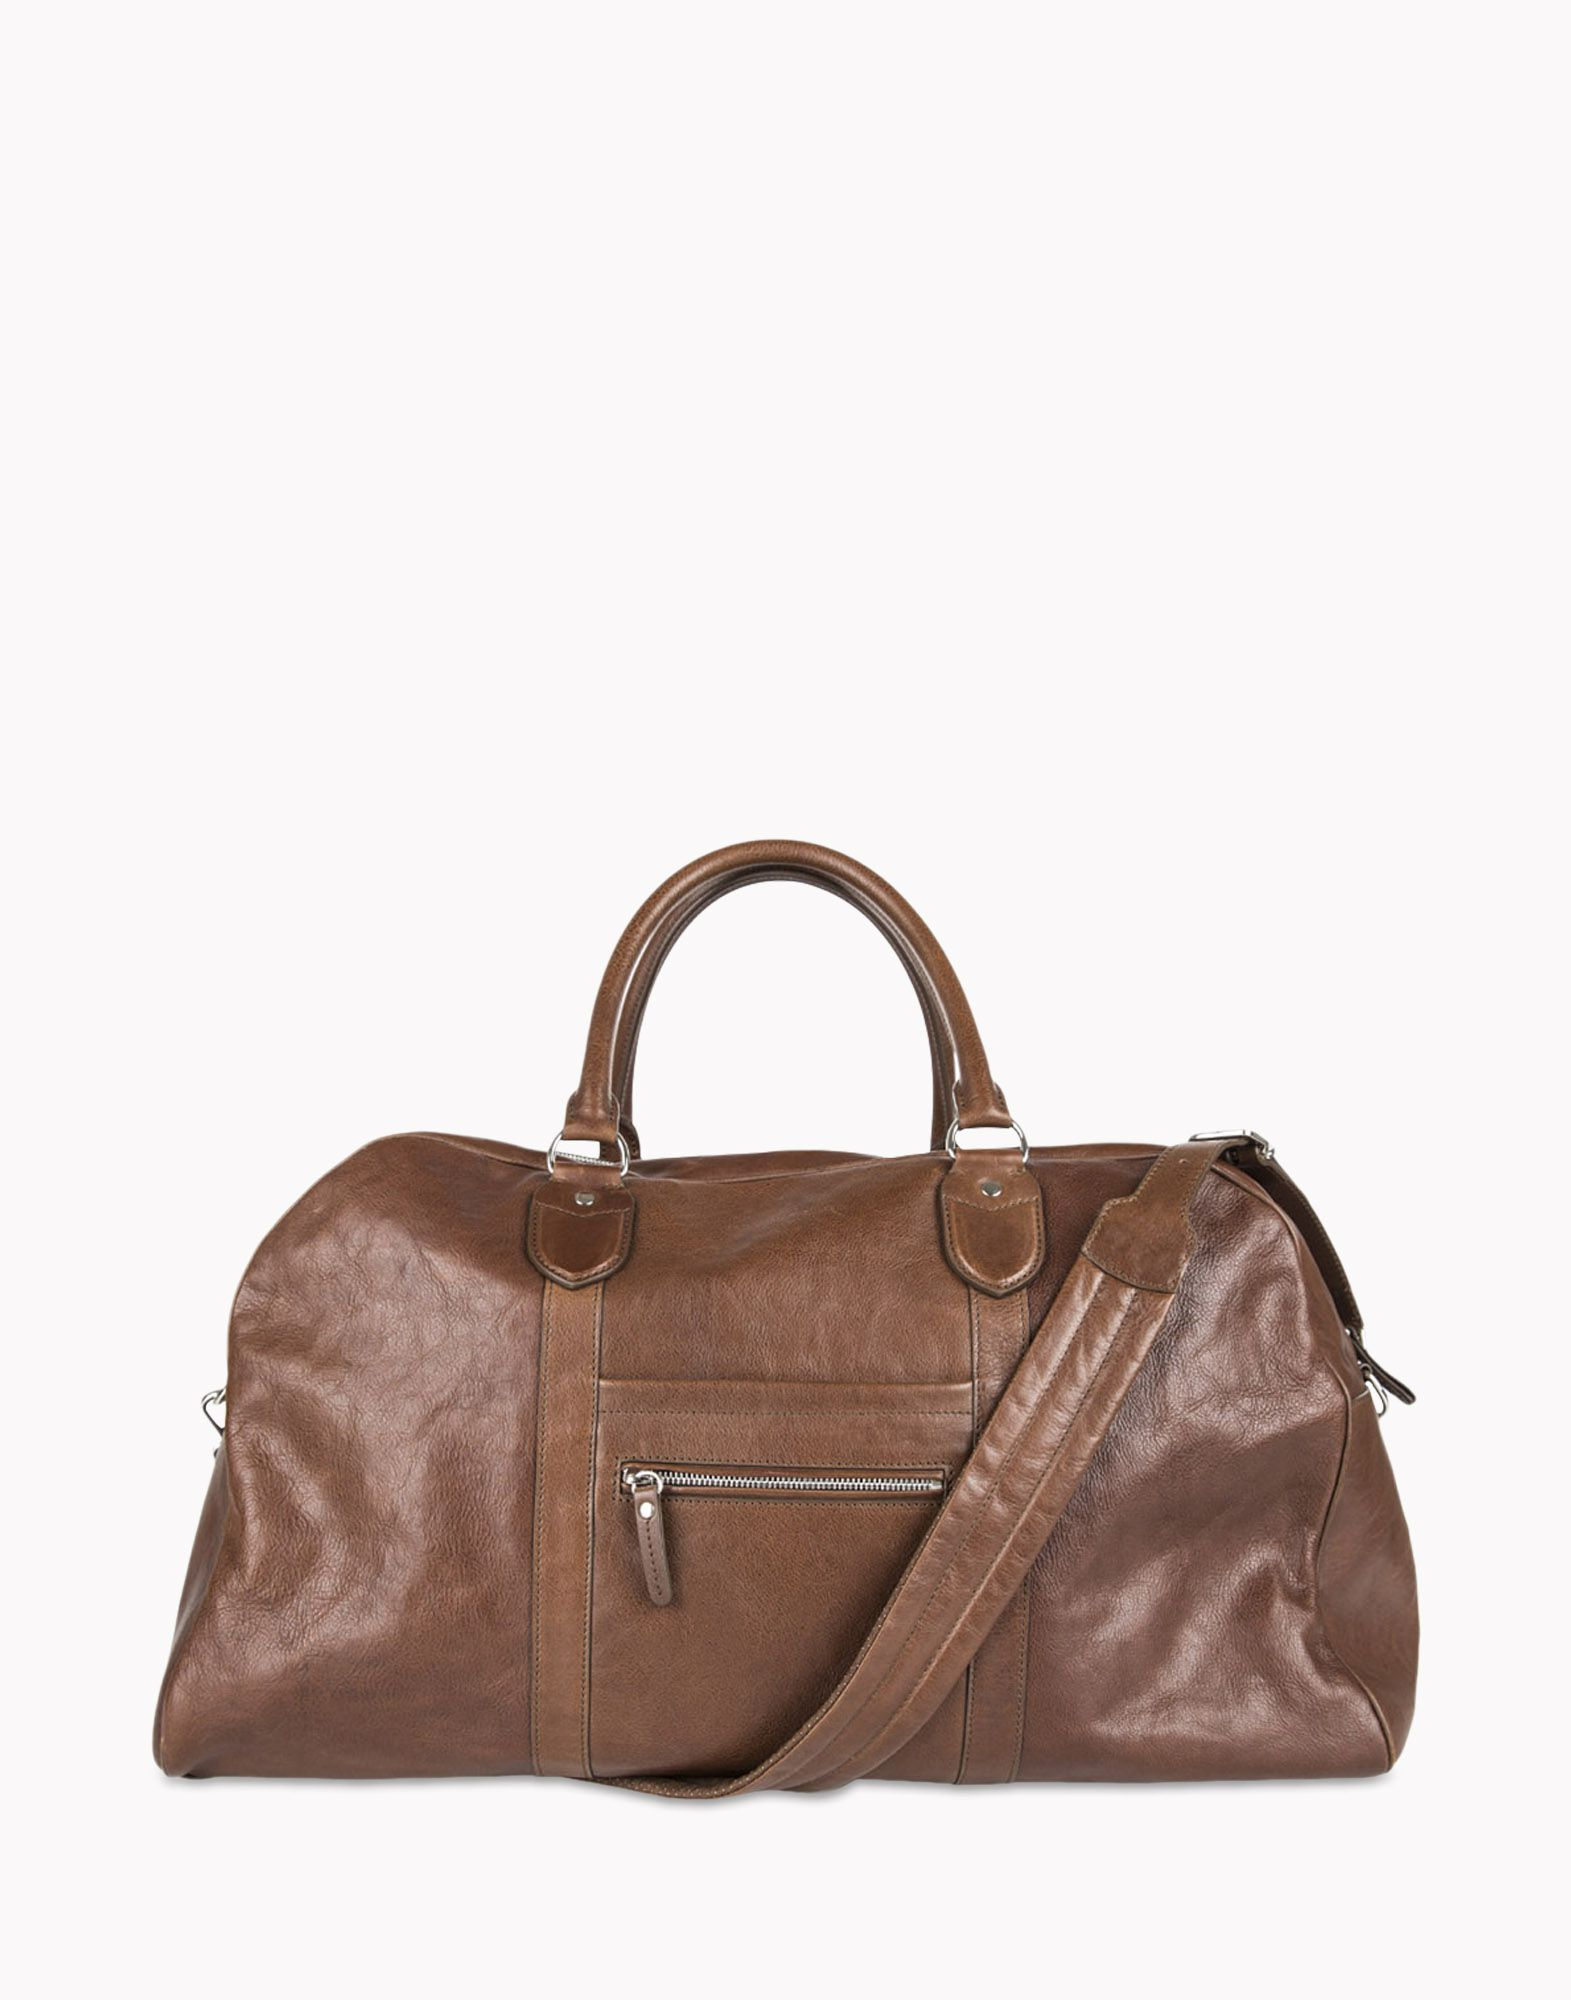 brunello-cucinelli-pale-brown-travel-bag-brown-product-2-679446764-normal.jpeg